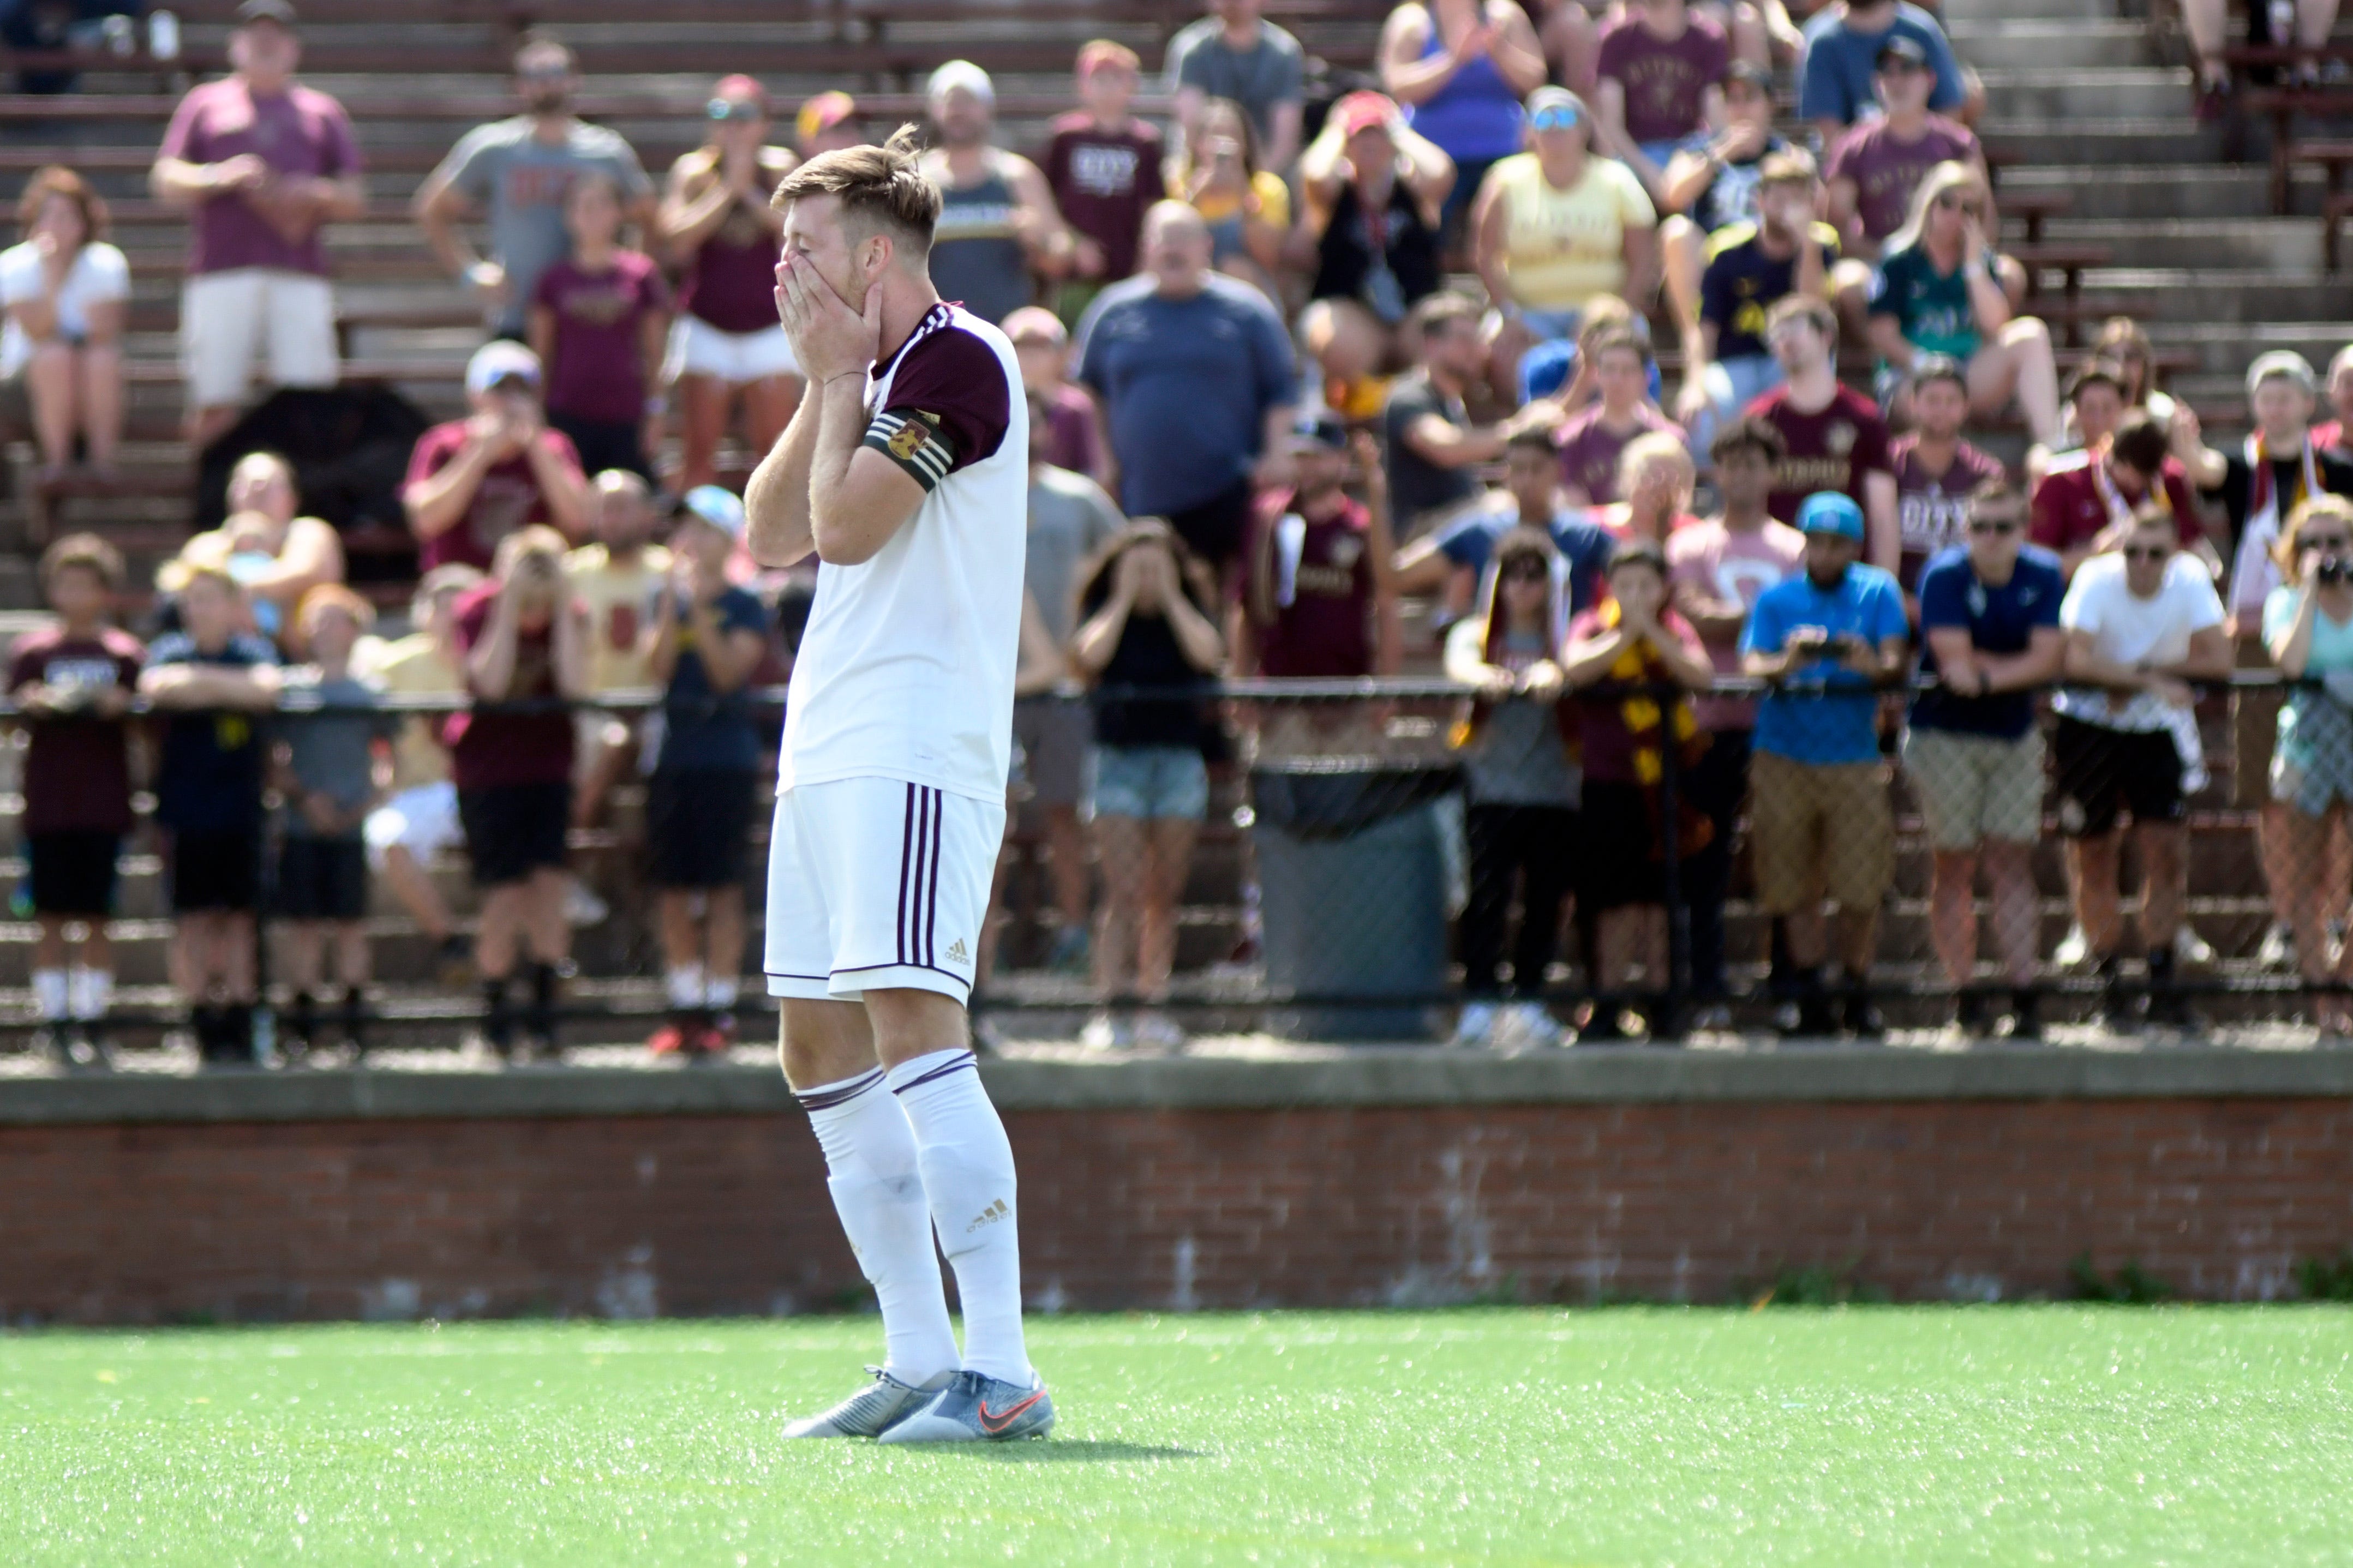 Detroit City FC's Stephen Carroll reacts after missing his penalty shot against Cleveland SC.